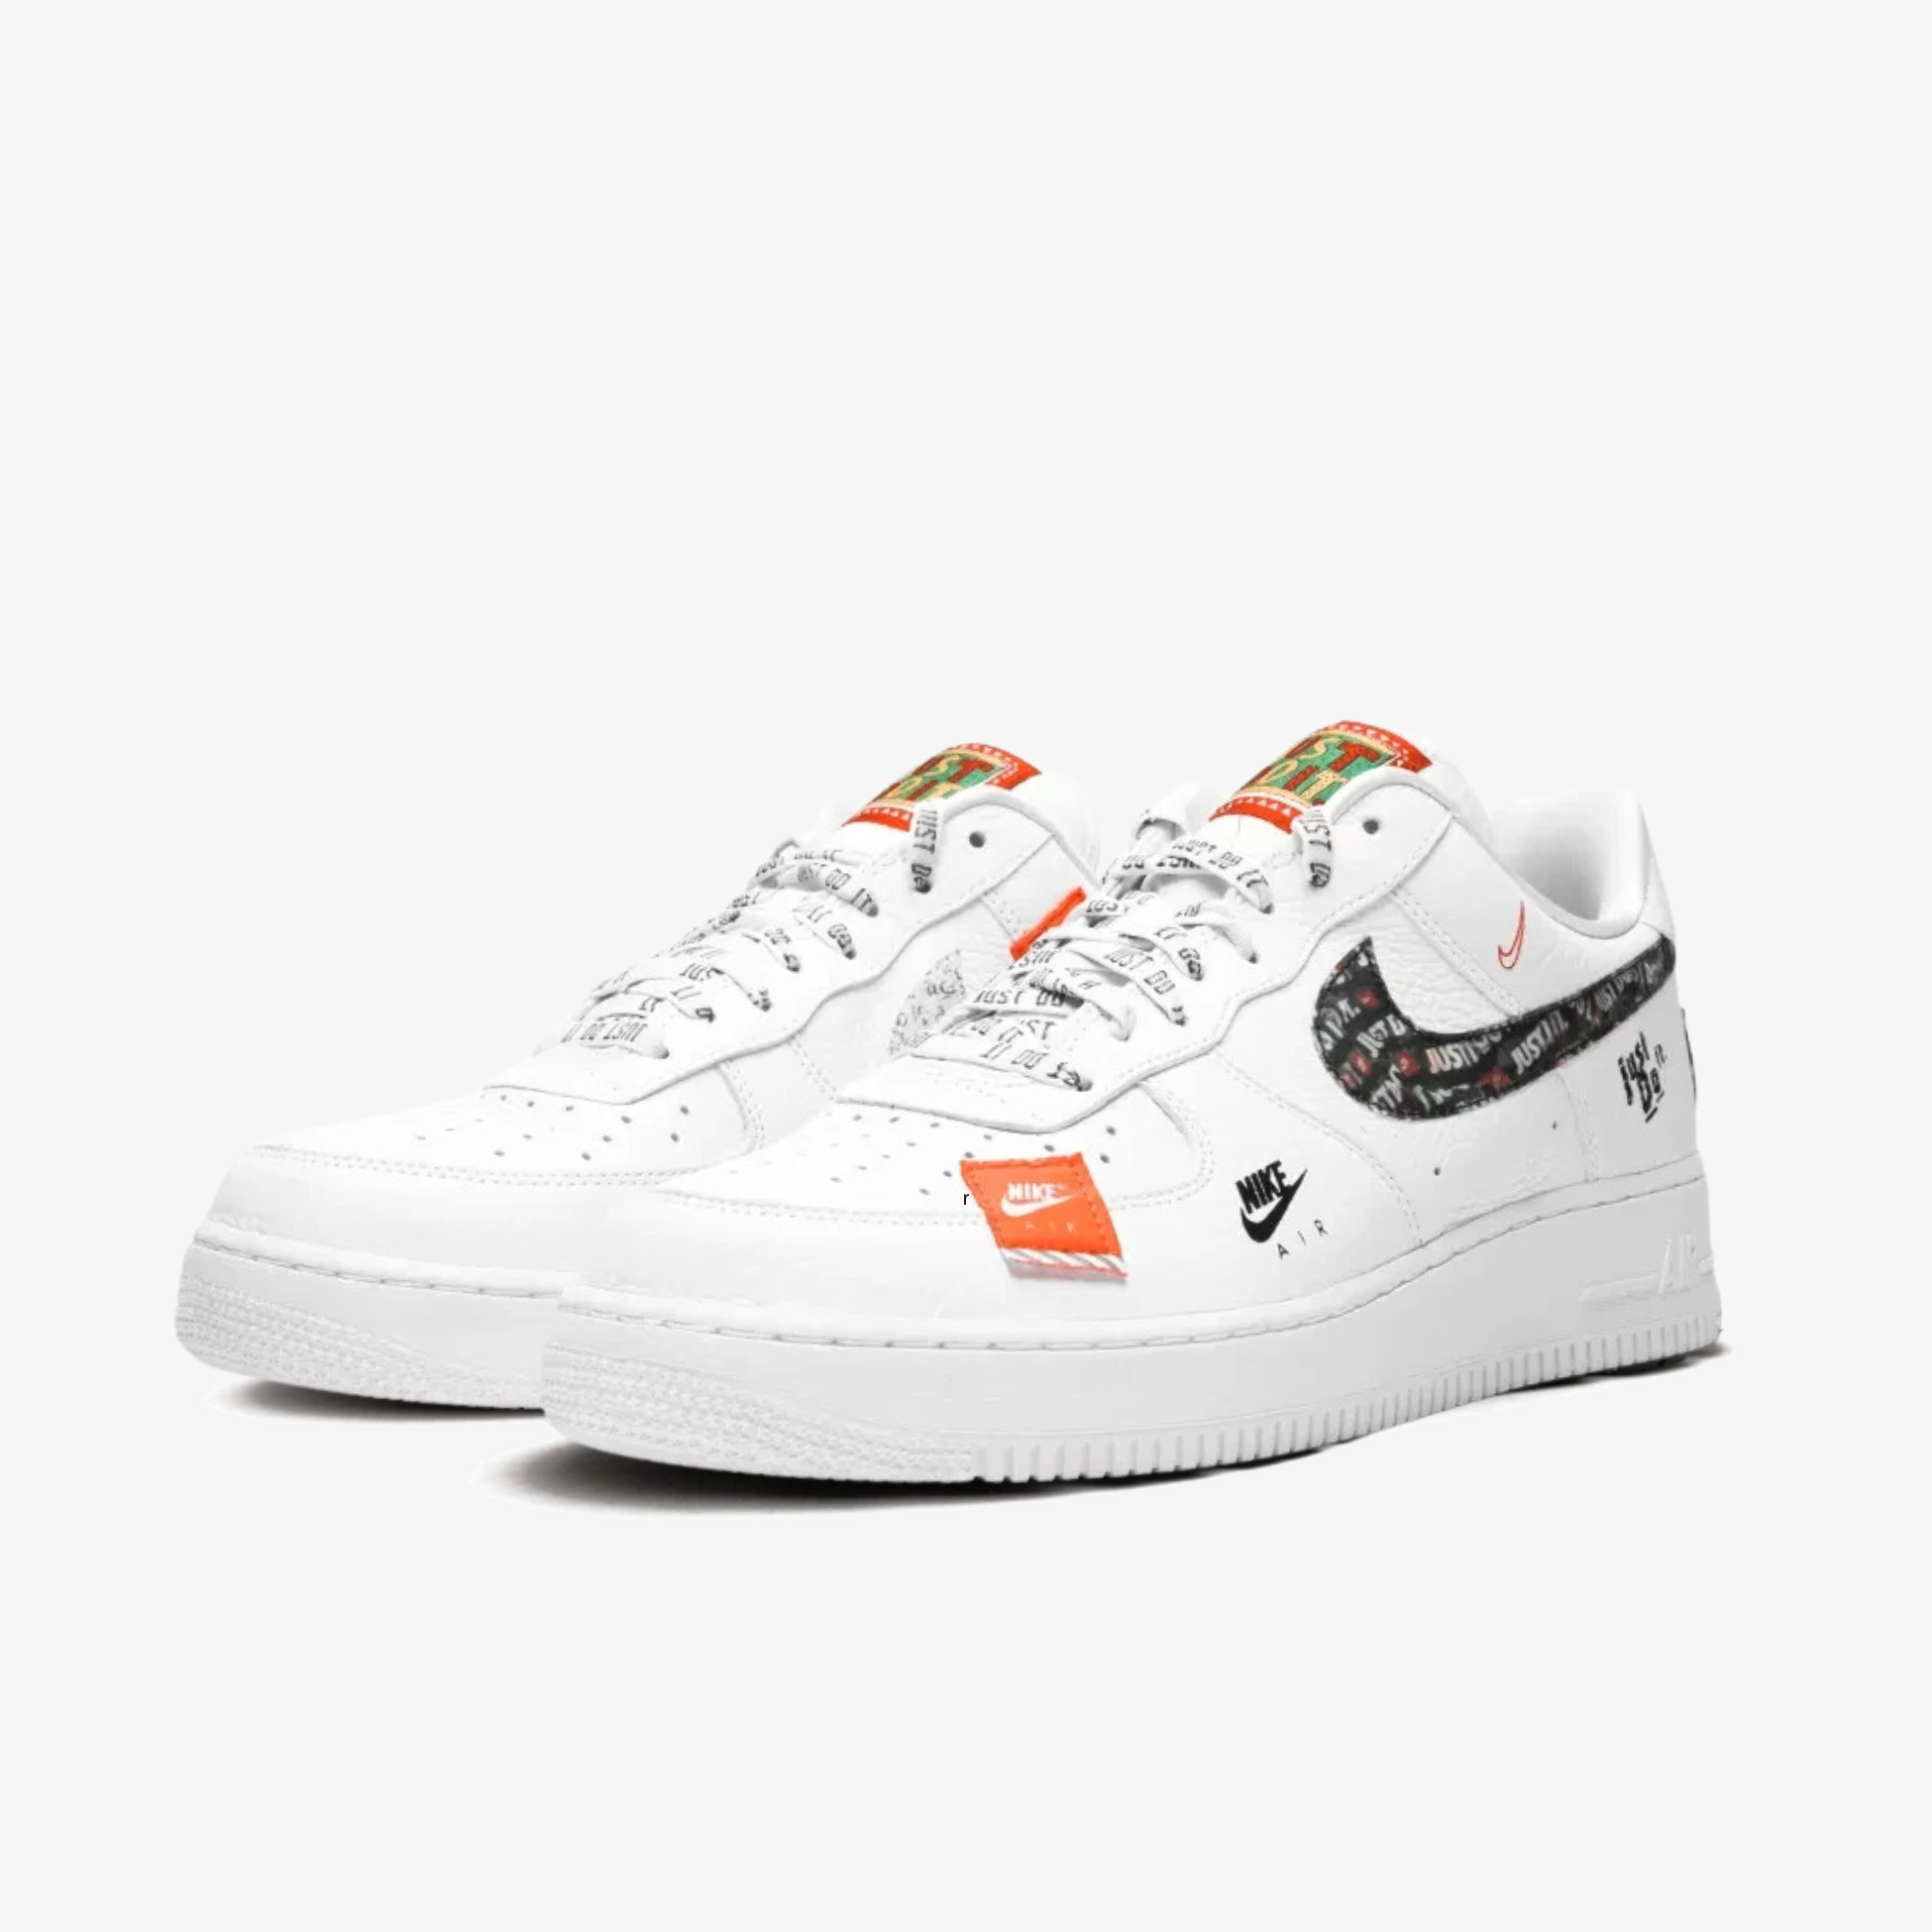 Nike Air Force 1 '07 PRM "Just Do It" Blanc